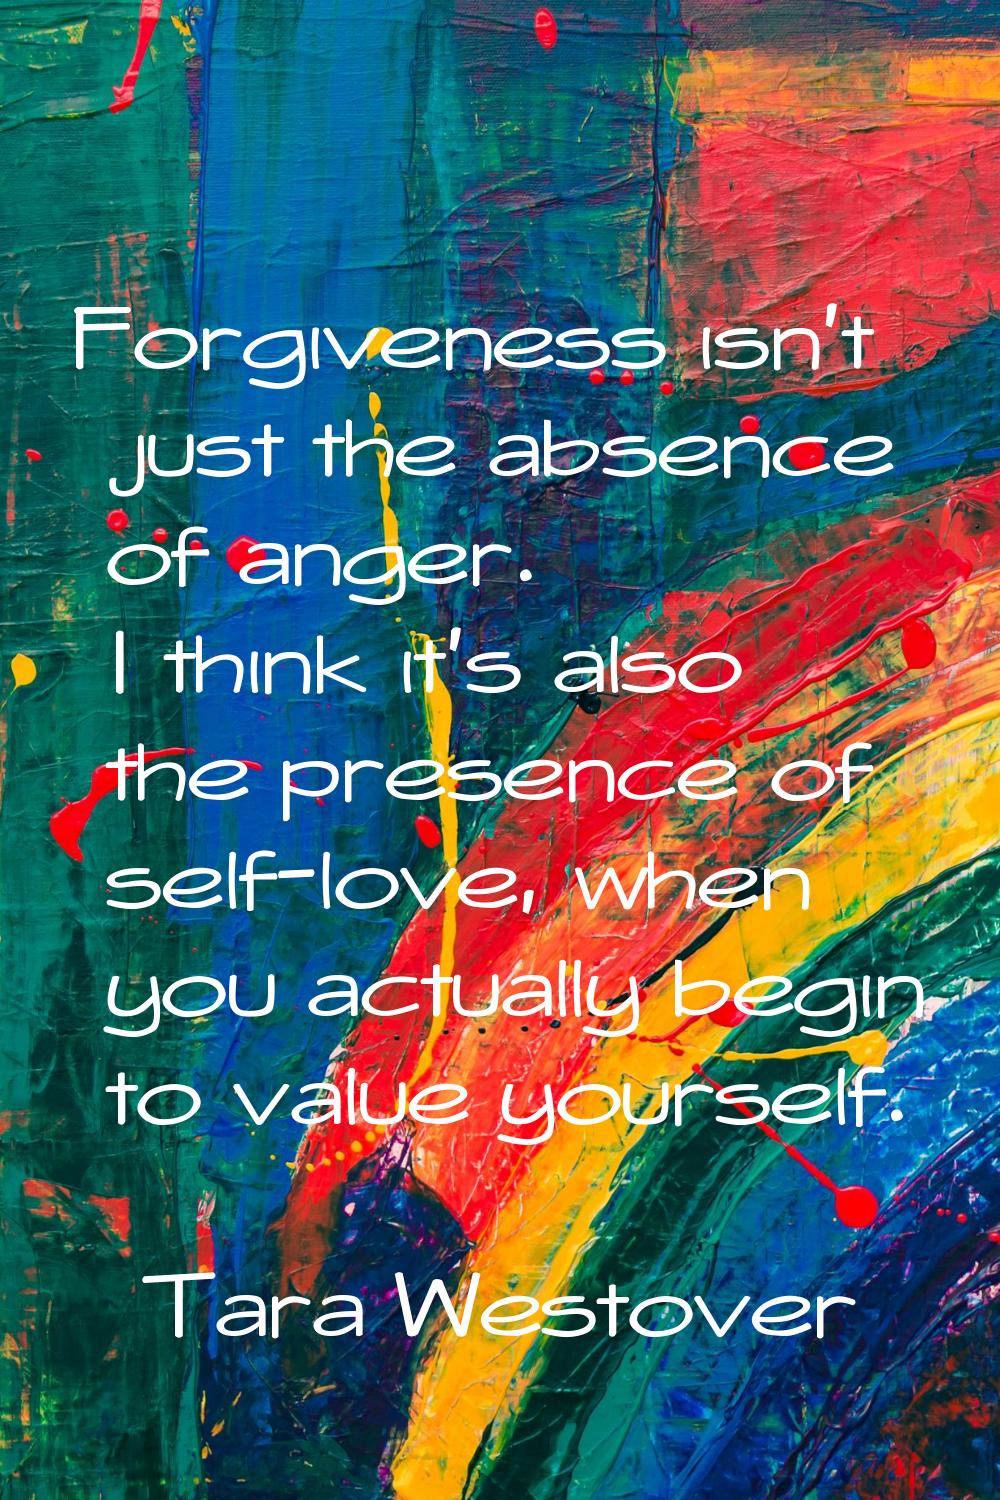 Forgiveness isn't just the absence of anger. I think it's also the presence of self-love, when you 